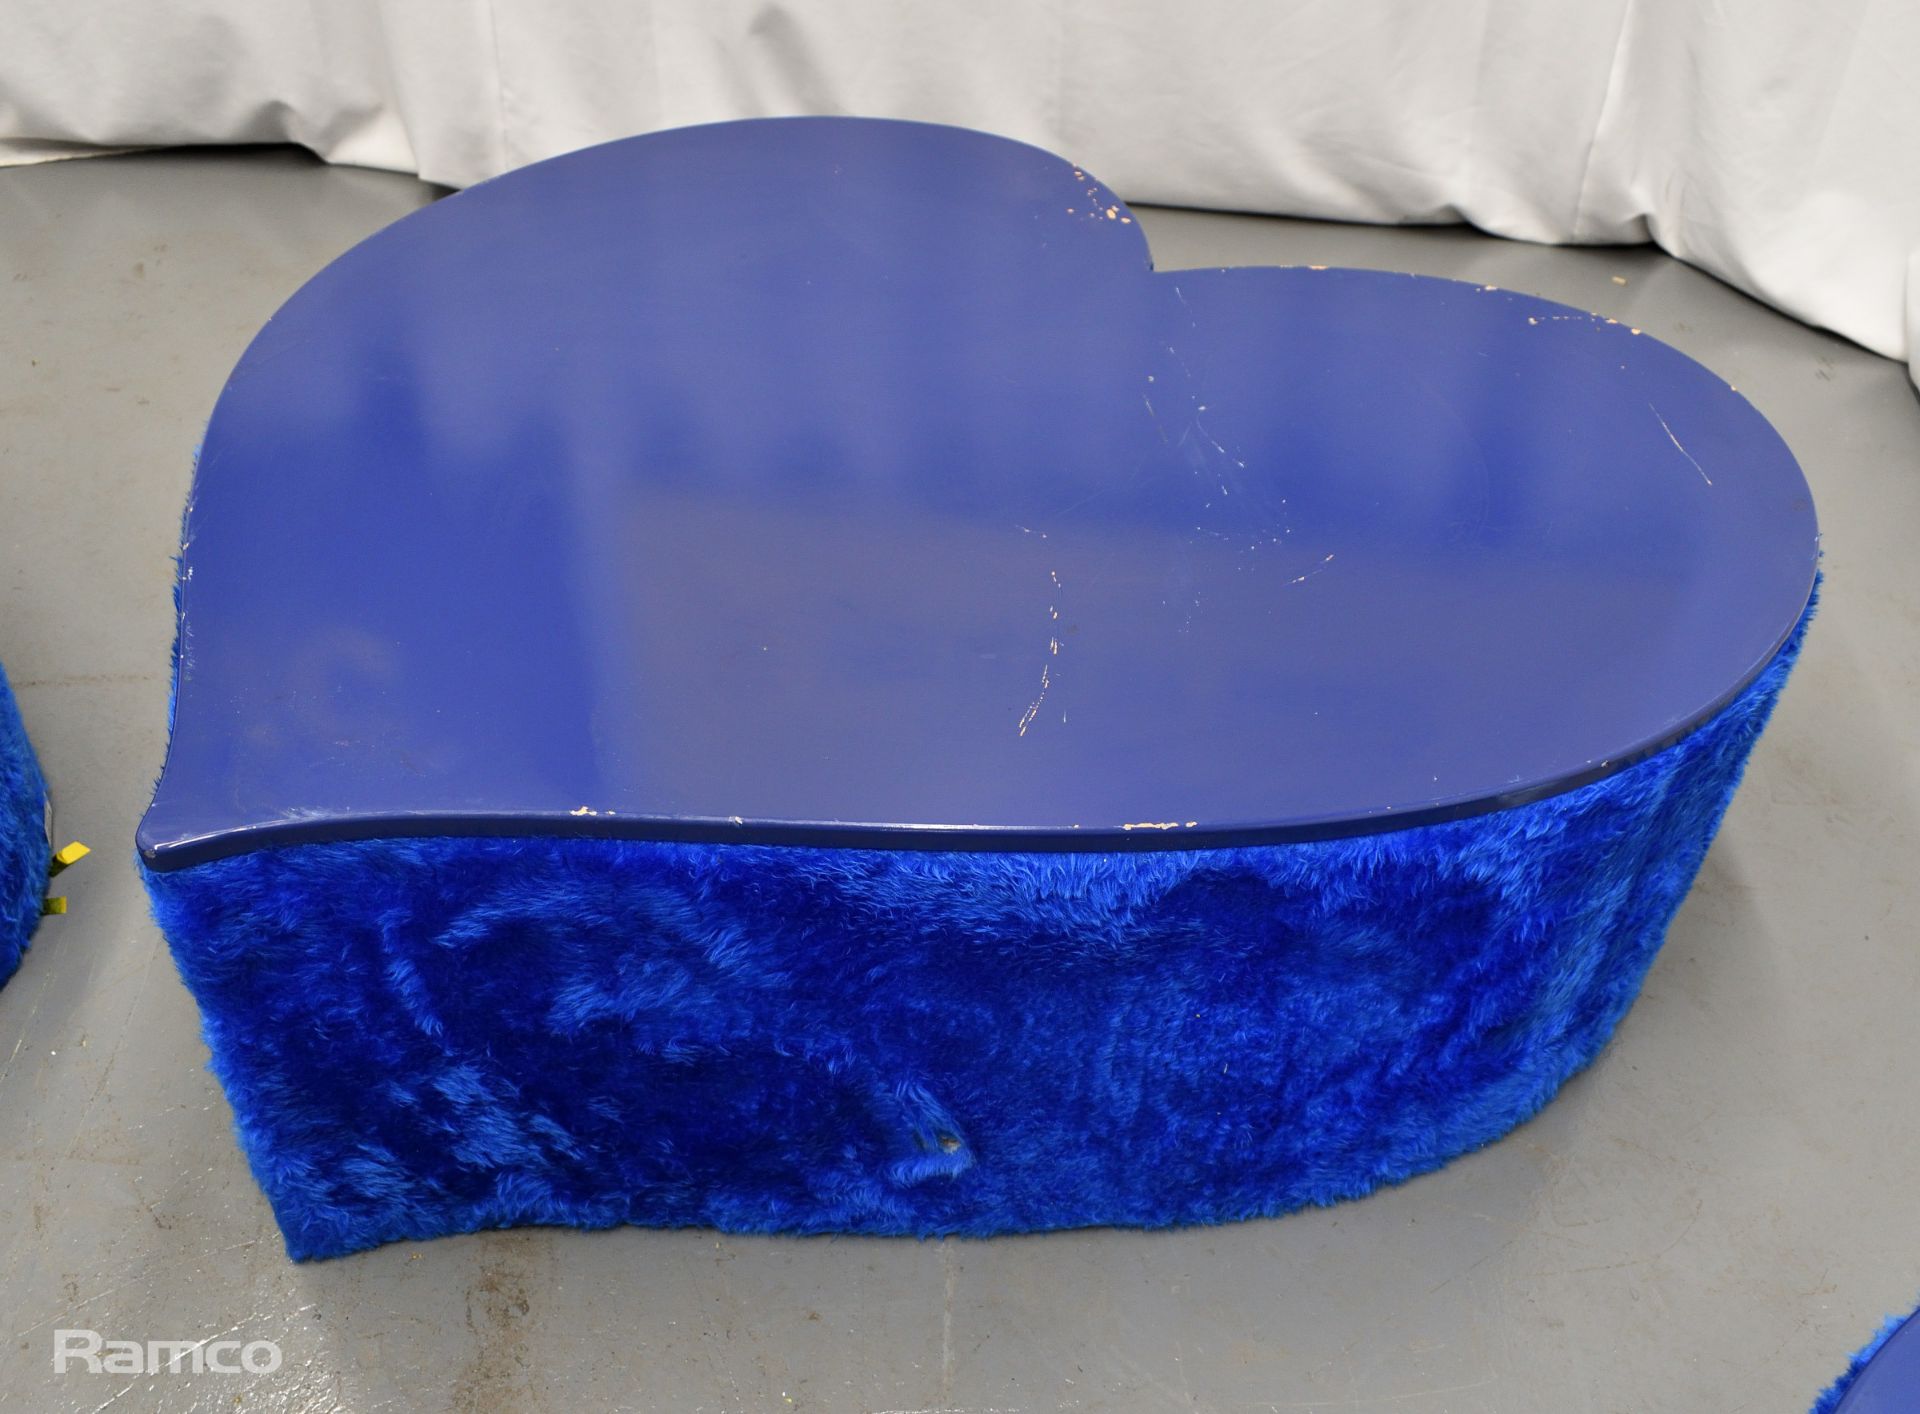 4x Asymmetrical heart shaped blue fur-covered wooden tables from countries' seating area - Image 12 of 18